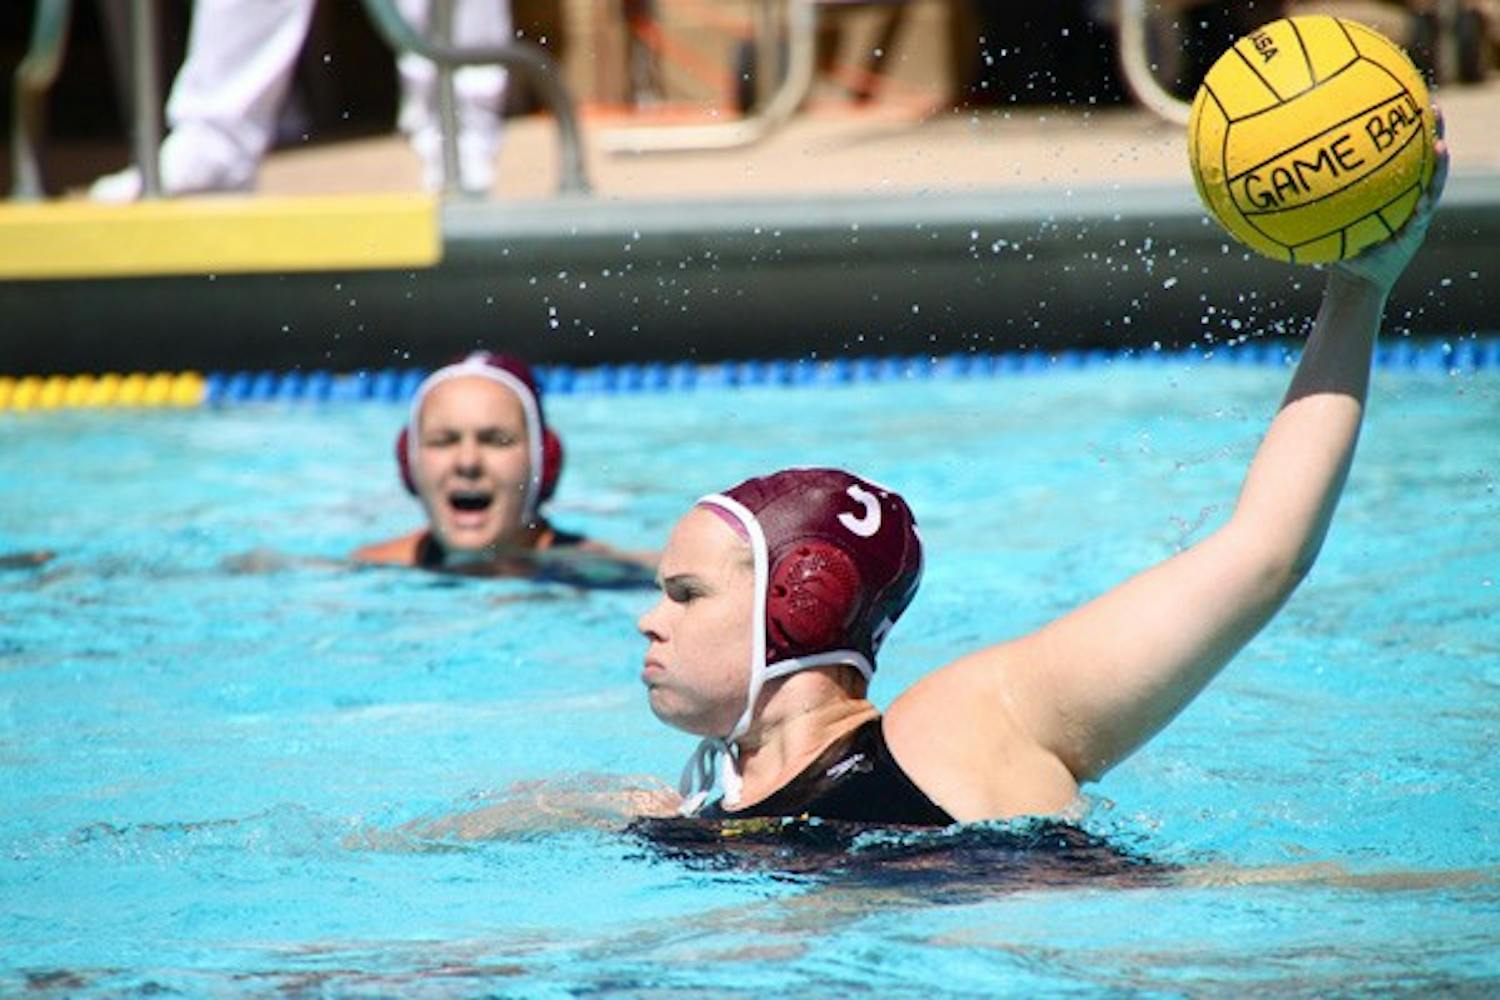 Not a charm: ASU junior Annabelle Carter looks to make a throw during the Sun Devils’ 10-8 loss to San Jose State on Saturday. ASU fell short in their attempt to beat SJSU after winning their first two contests this year. (Photo by Rosie Gochnour)